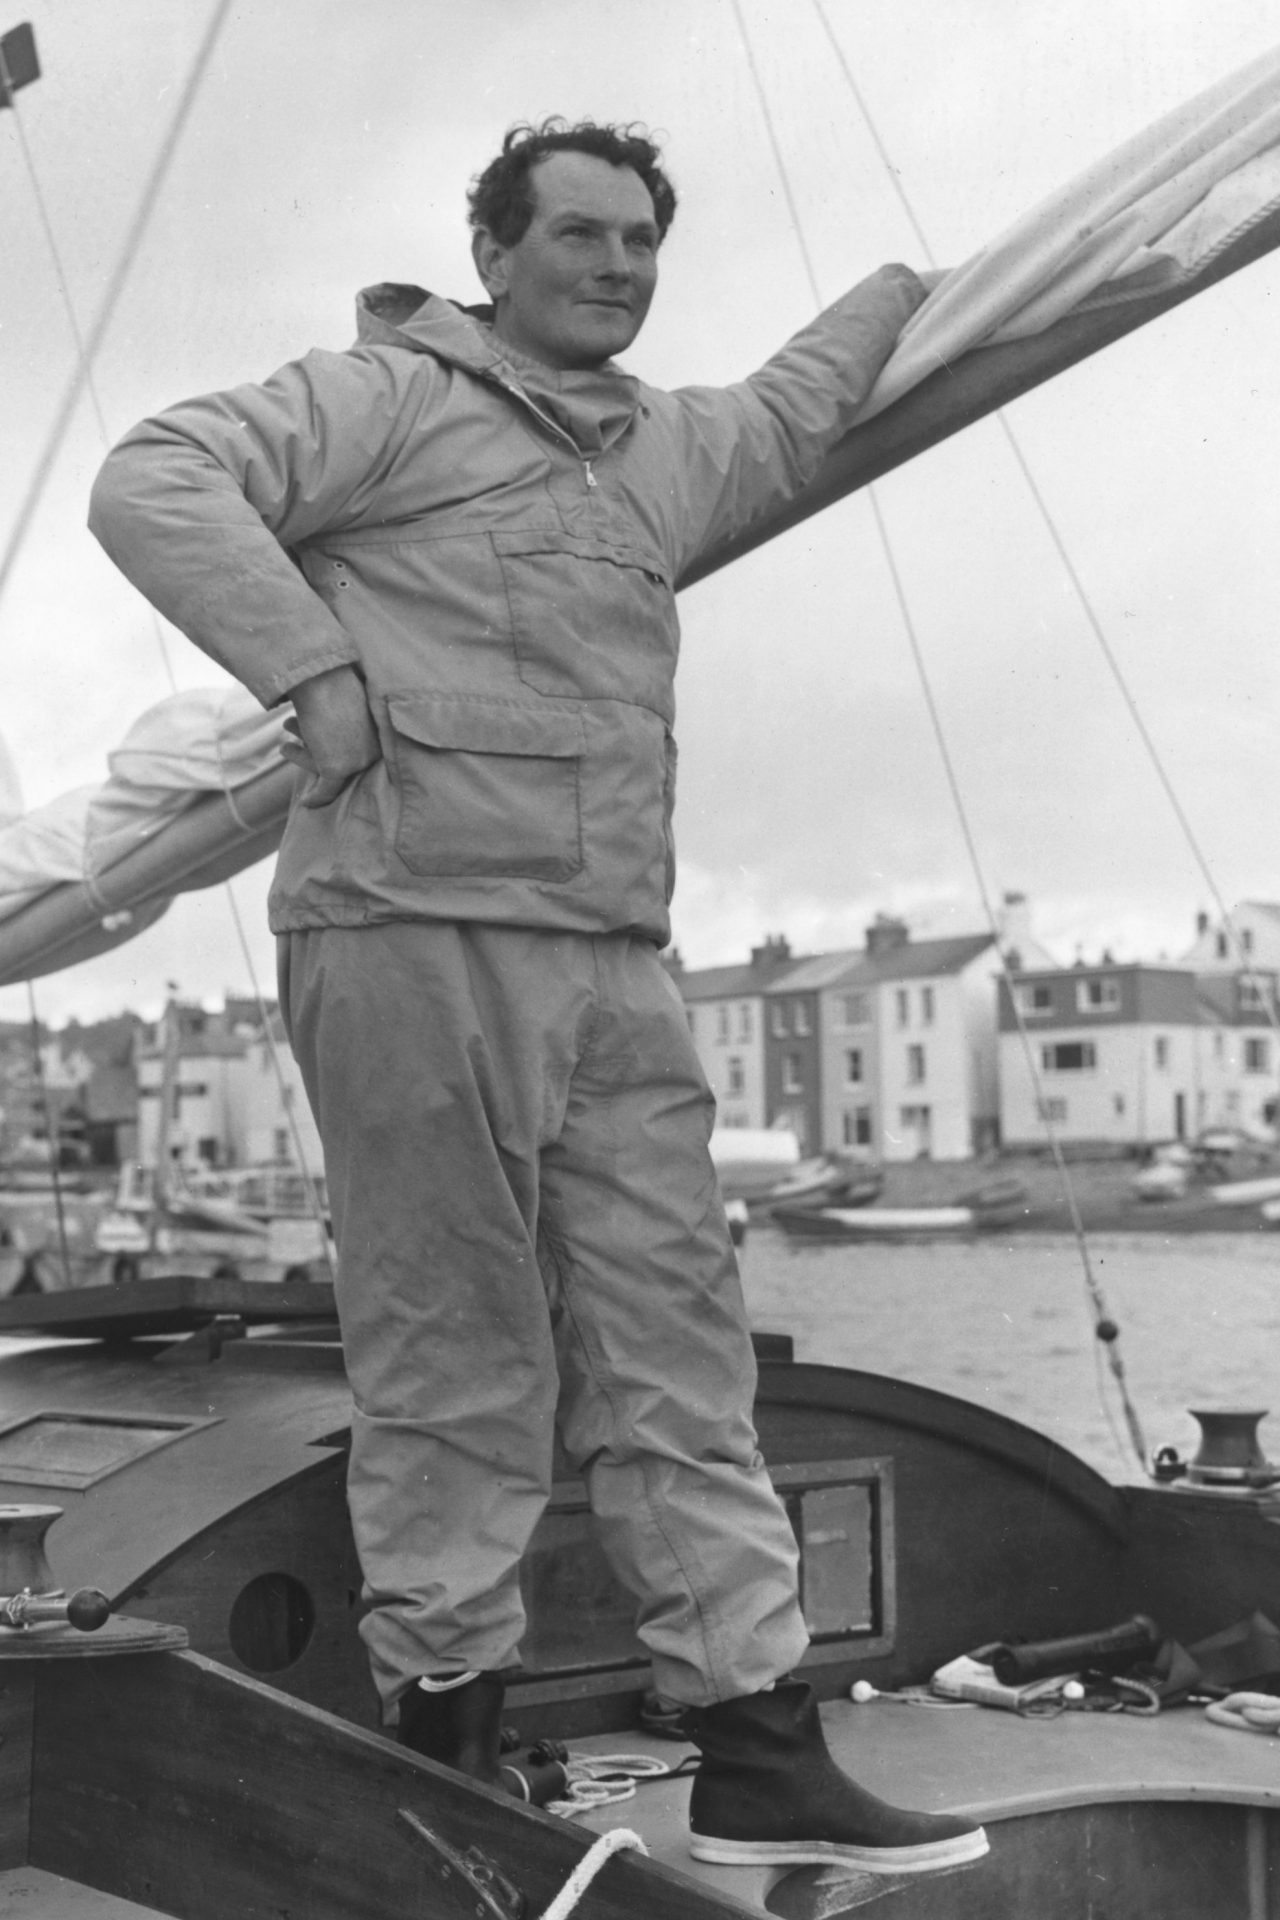 <p>The most peculiar competitor in the race was Donald Crowhurst, a British businessman and amateur sailor who challenged himself by joining the race independently. Crowhurst was discharged from the Royal Air Force for unknown reasons, but would later start his own business named Electron Utilisation in 1962.</p>